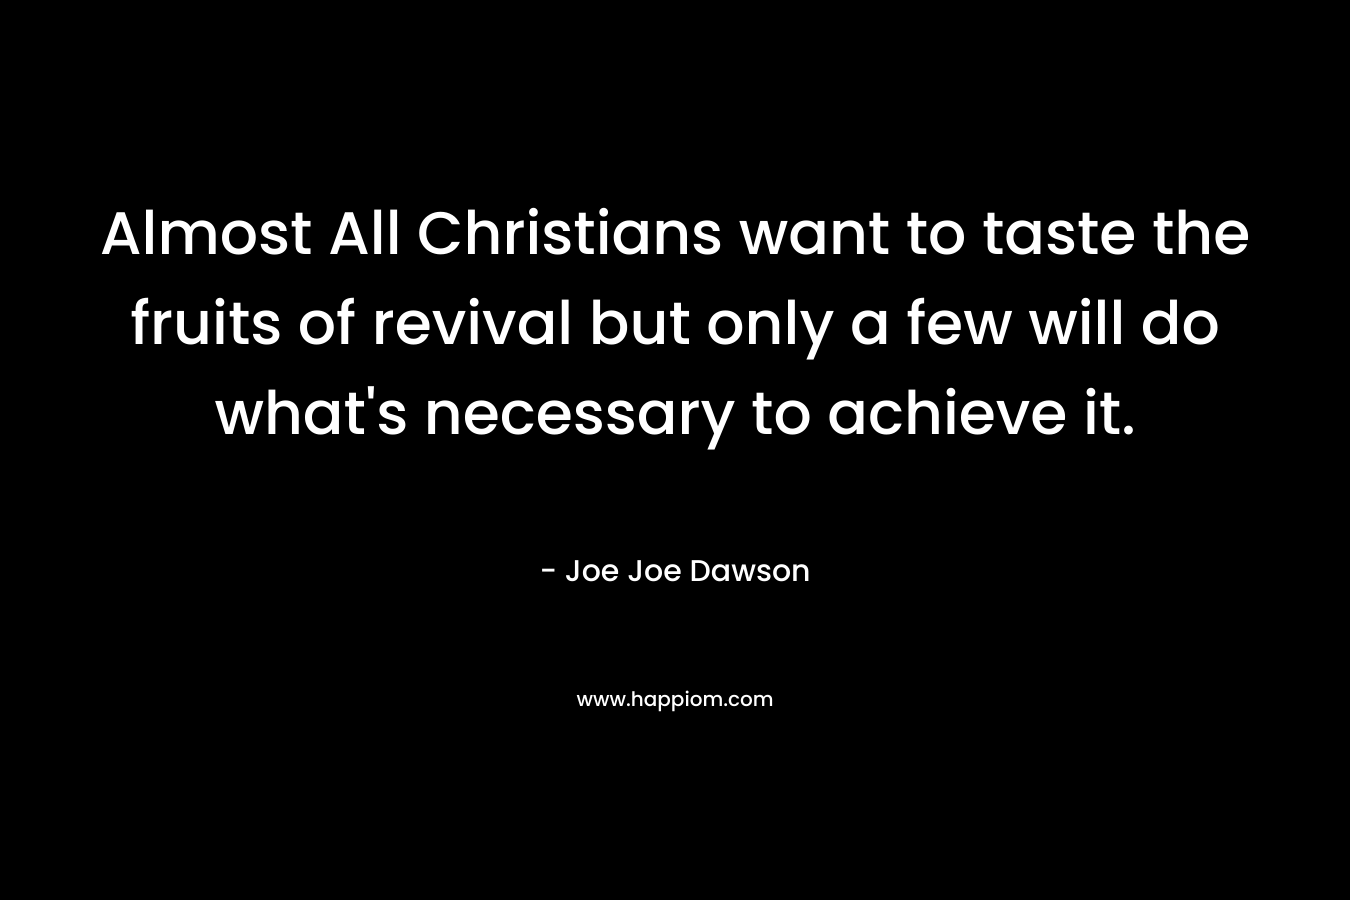 Almost All Christians want to taste the fruits of revival but only a few will do what's necessary to achieve it.